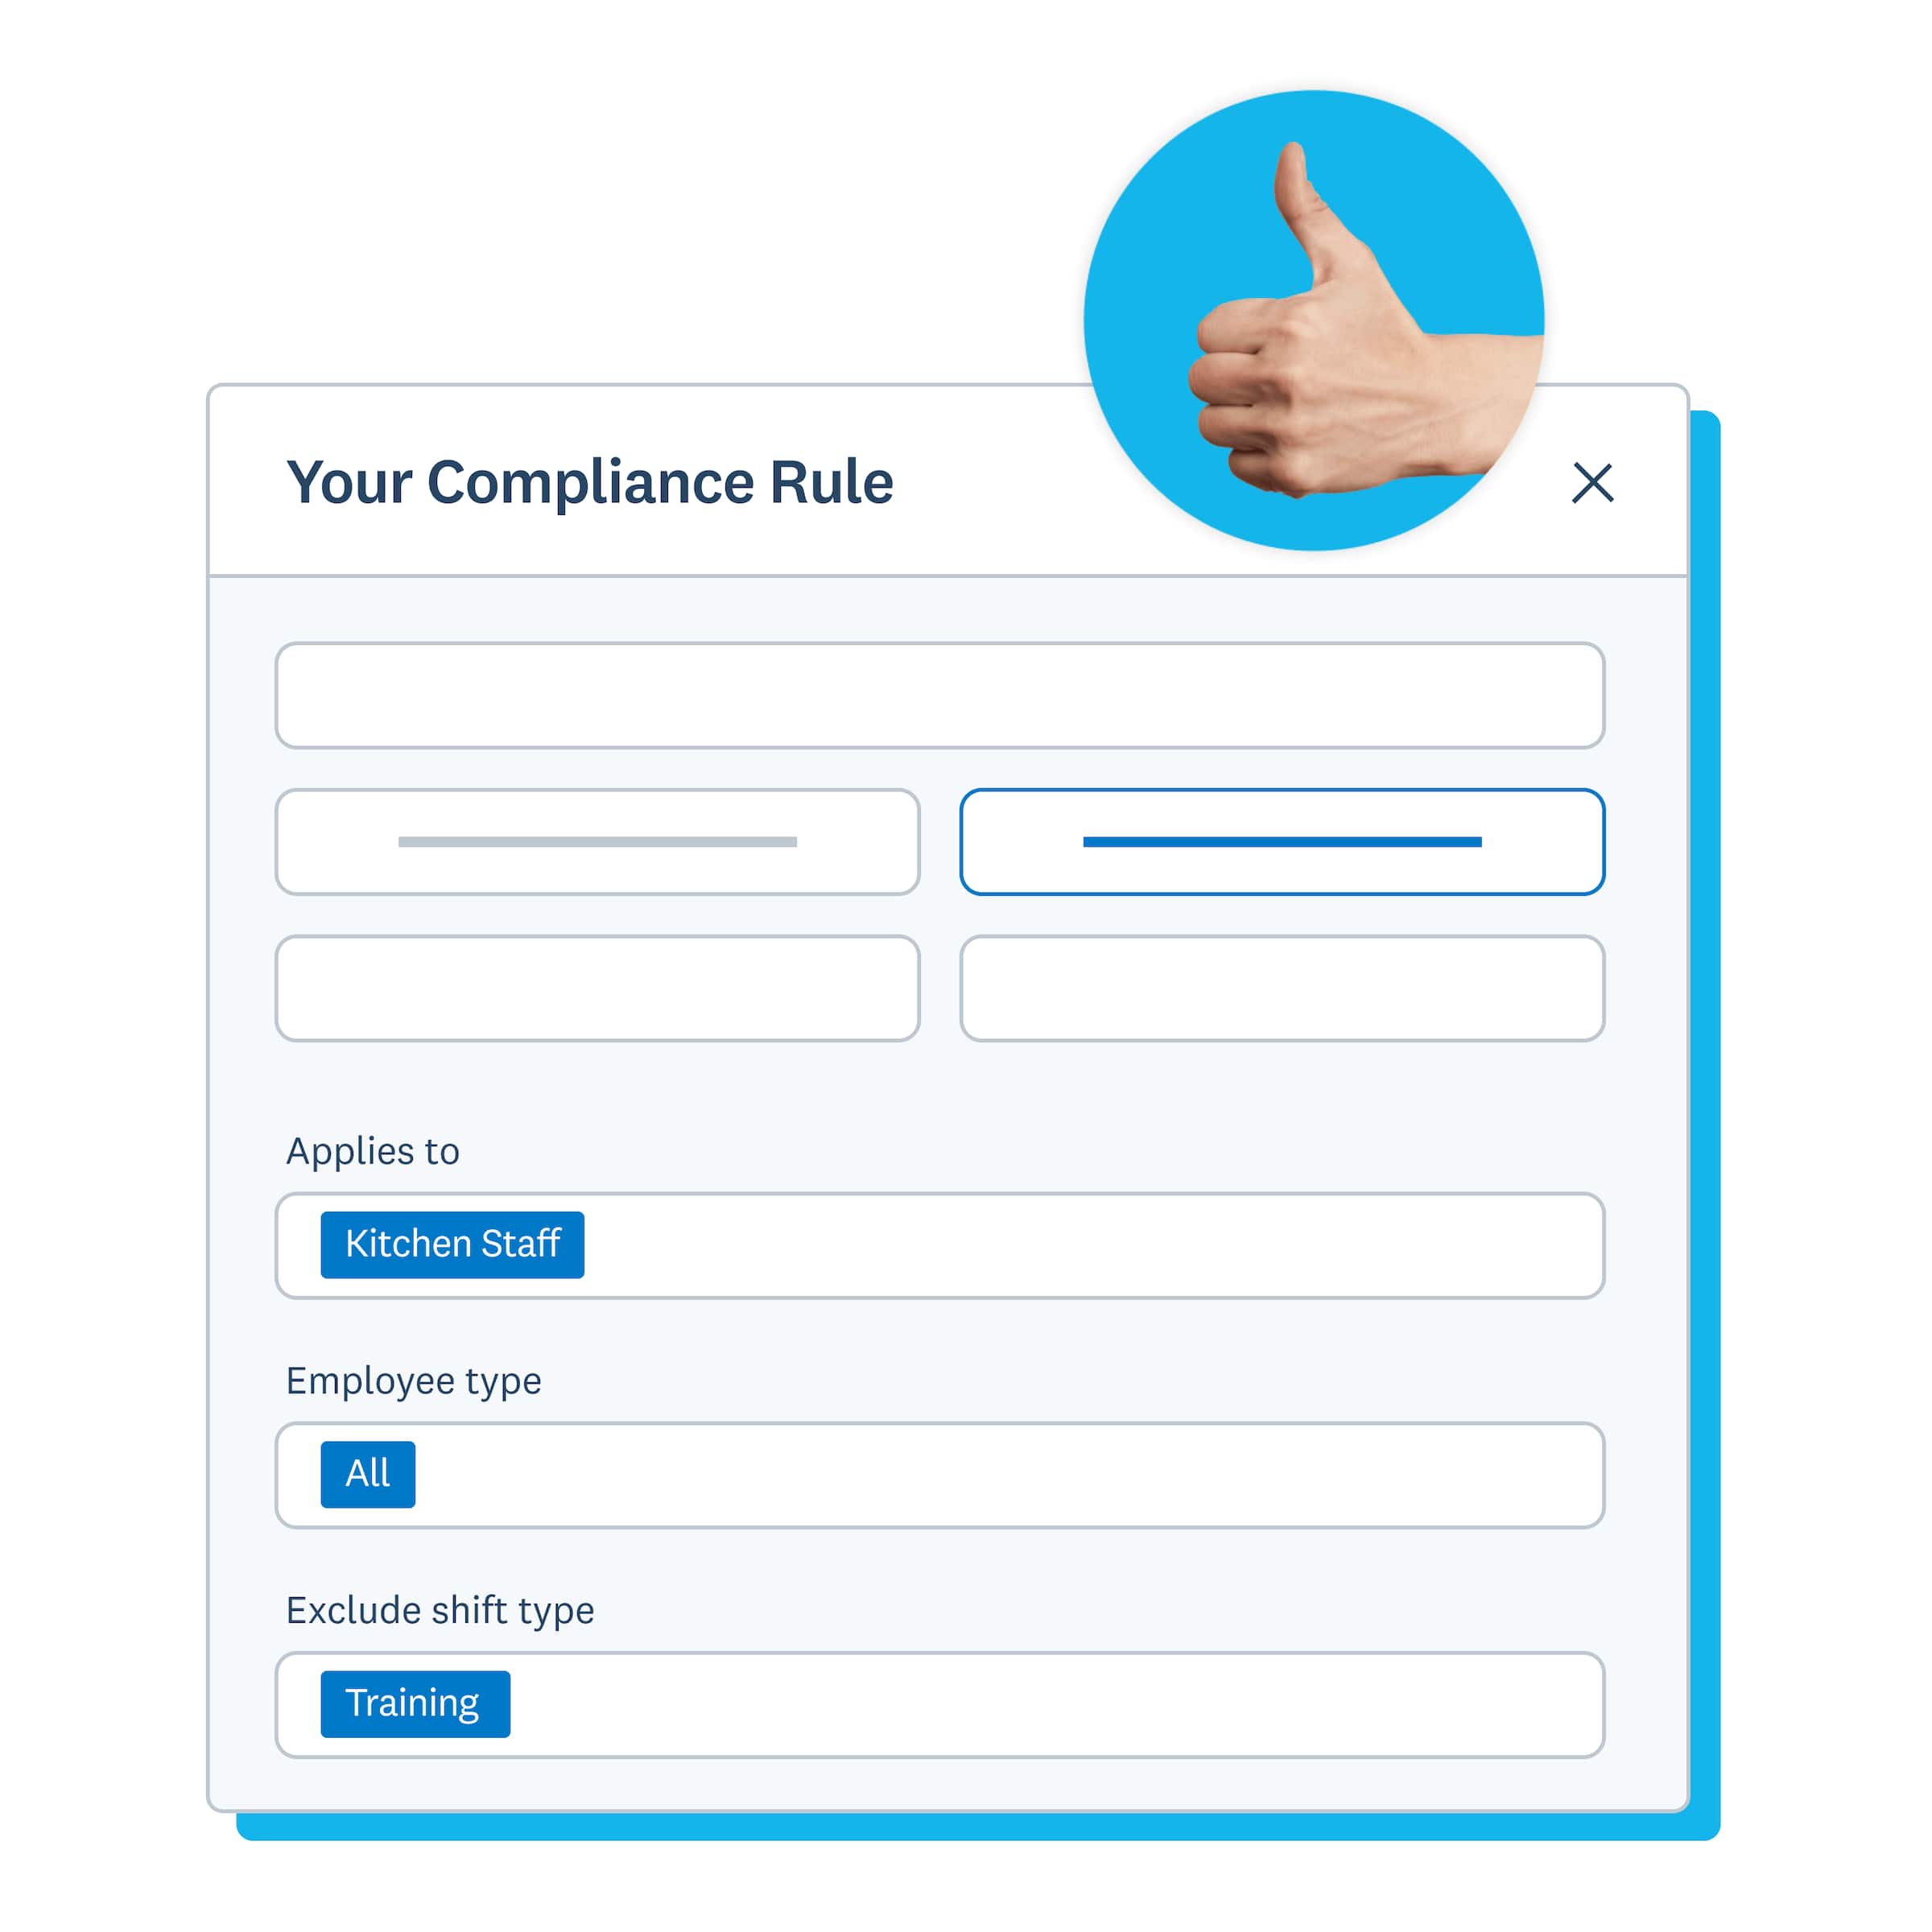 A thumbs up and a screen showing compliance rules that can be set up on the Planday workforce management system.